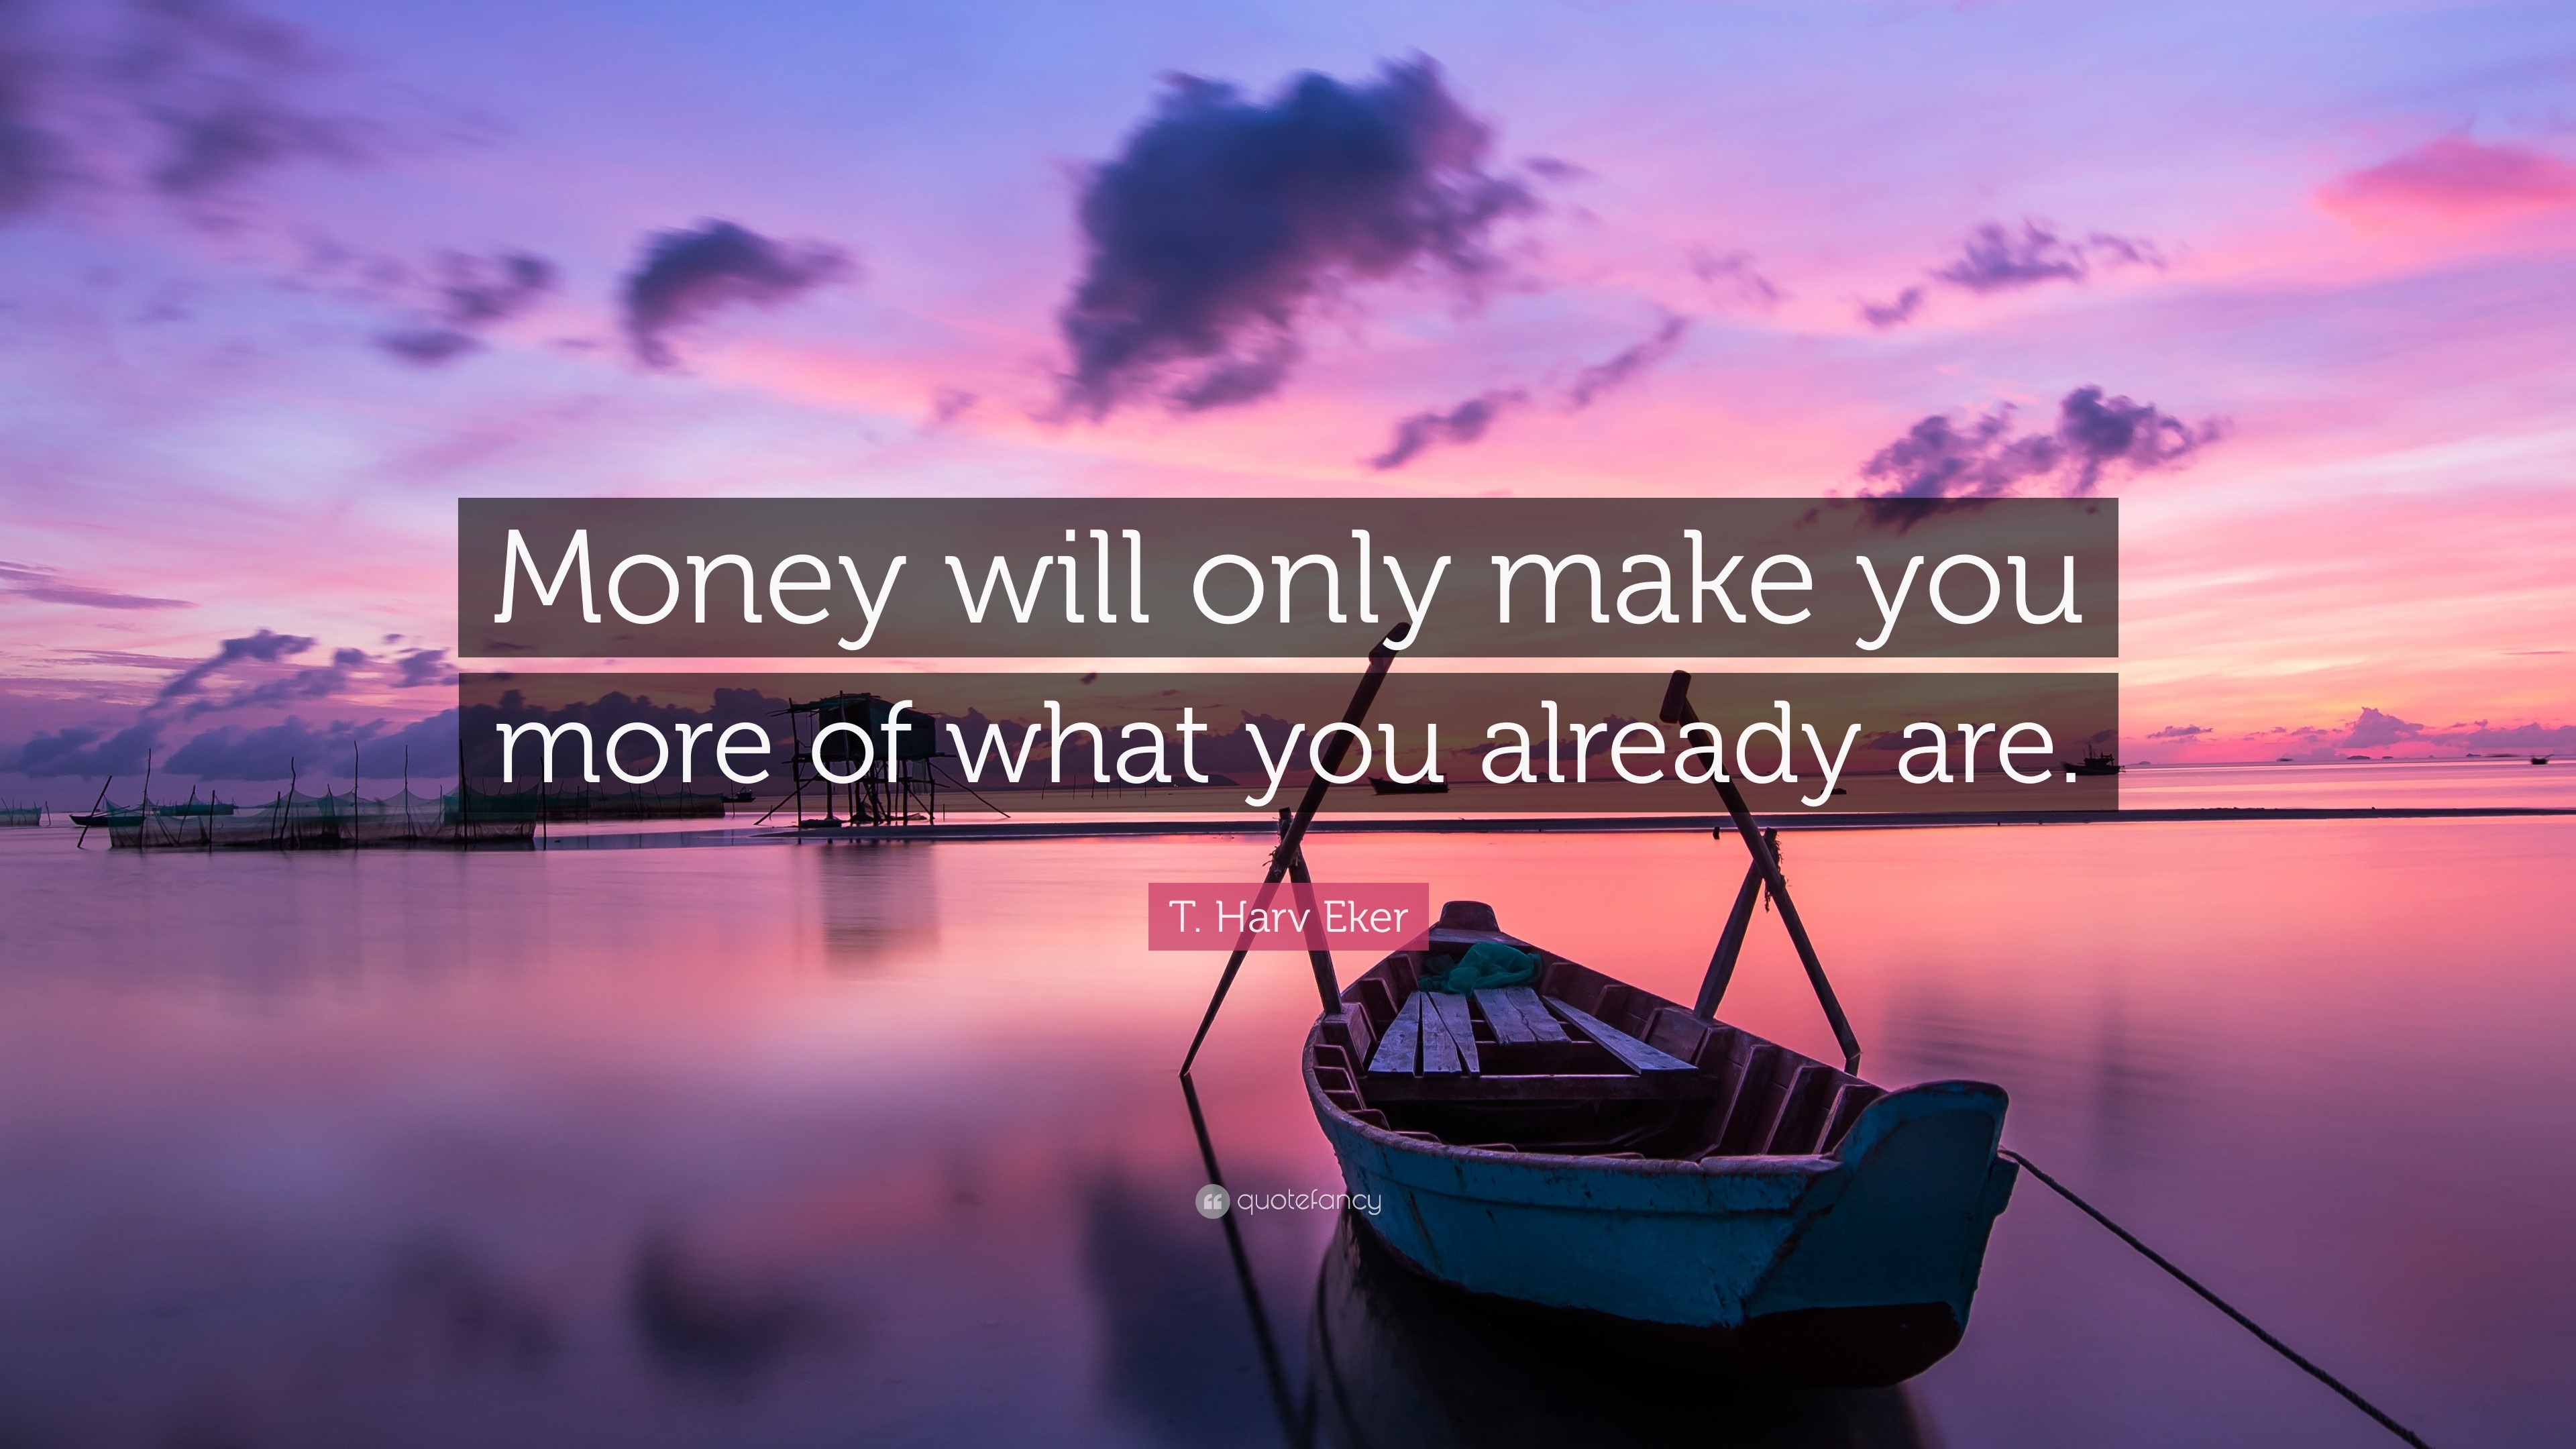 T. Harv Eker Quote: “Money will only make you more of what you already